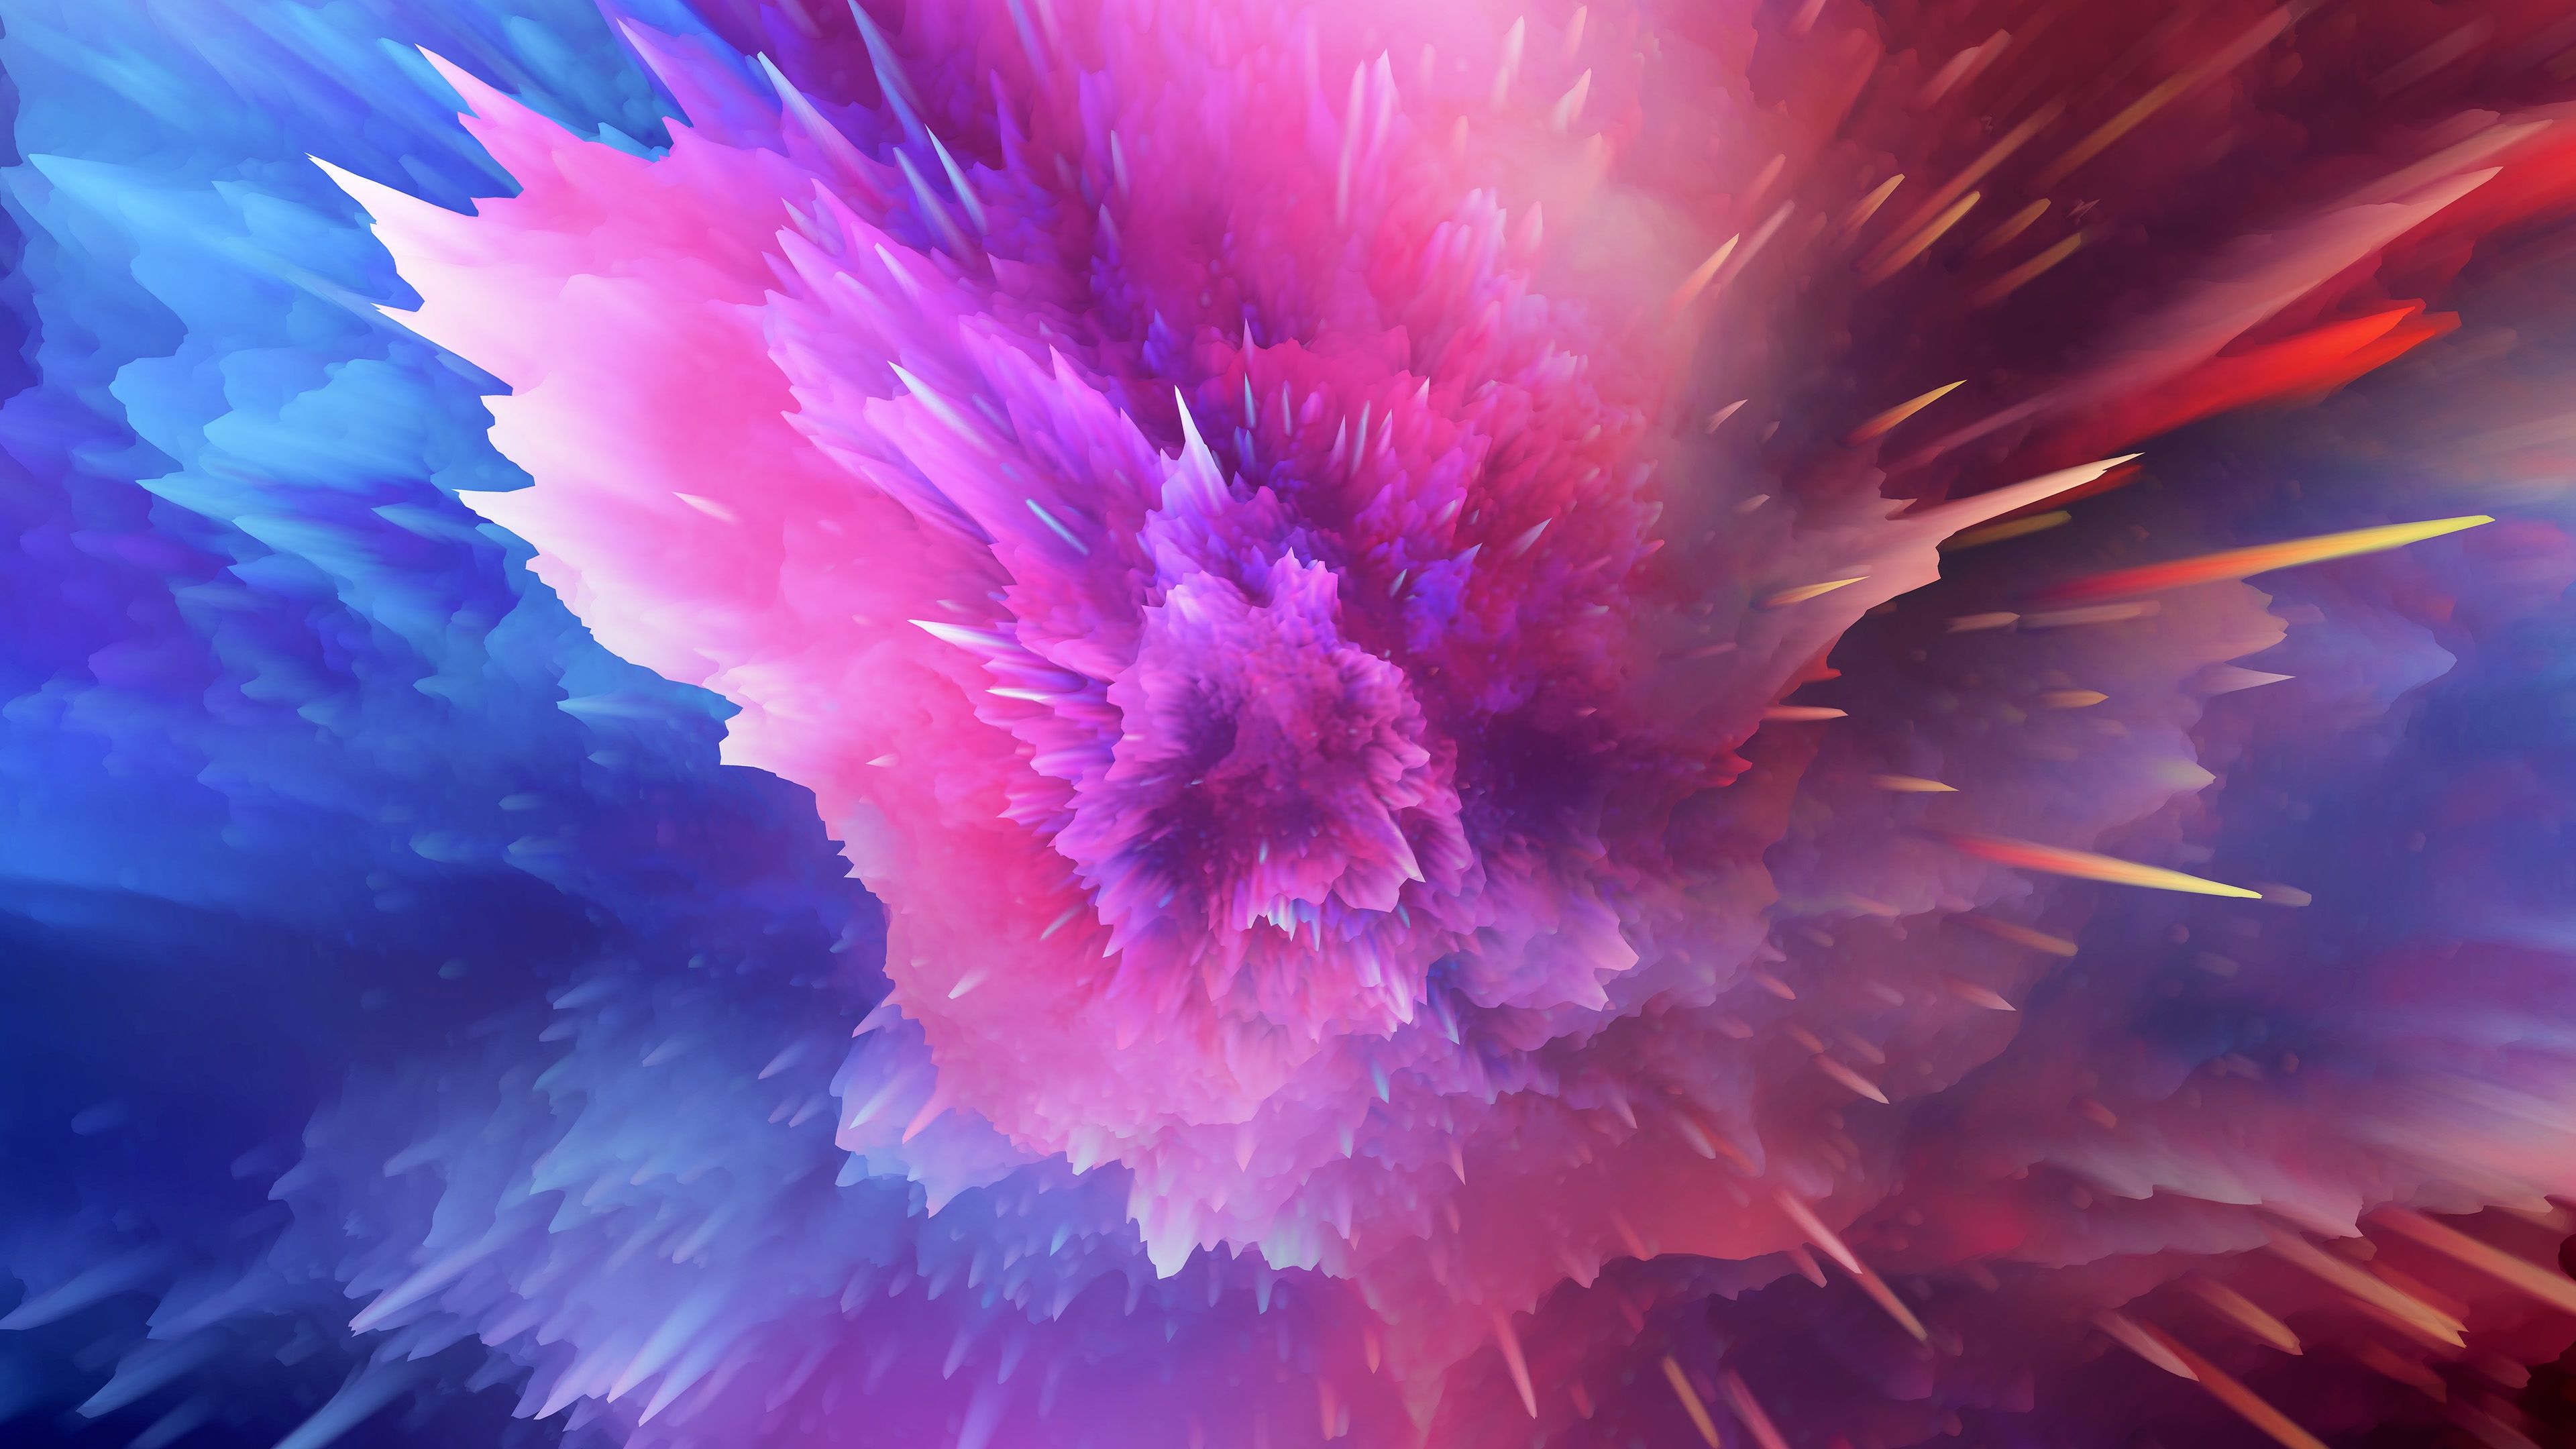 Burst 4K wallpaper for your desktop or mobile screen free and easy to download